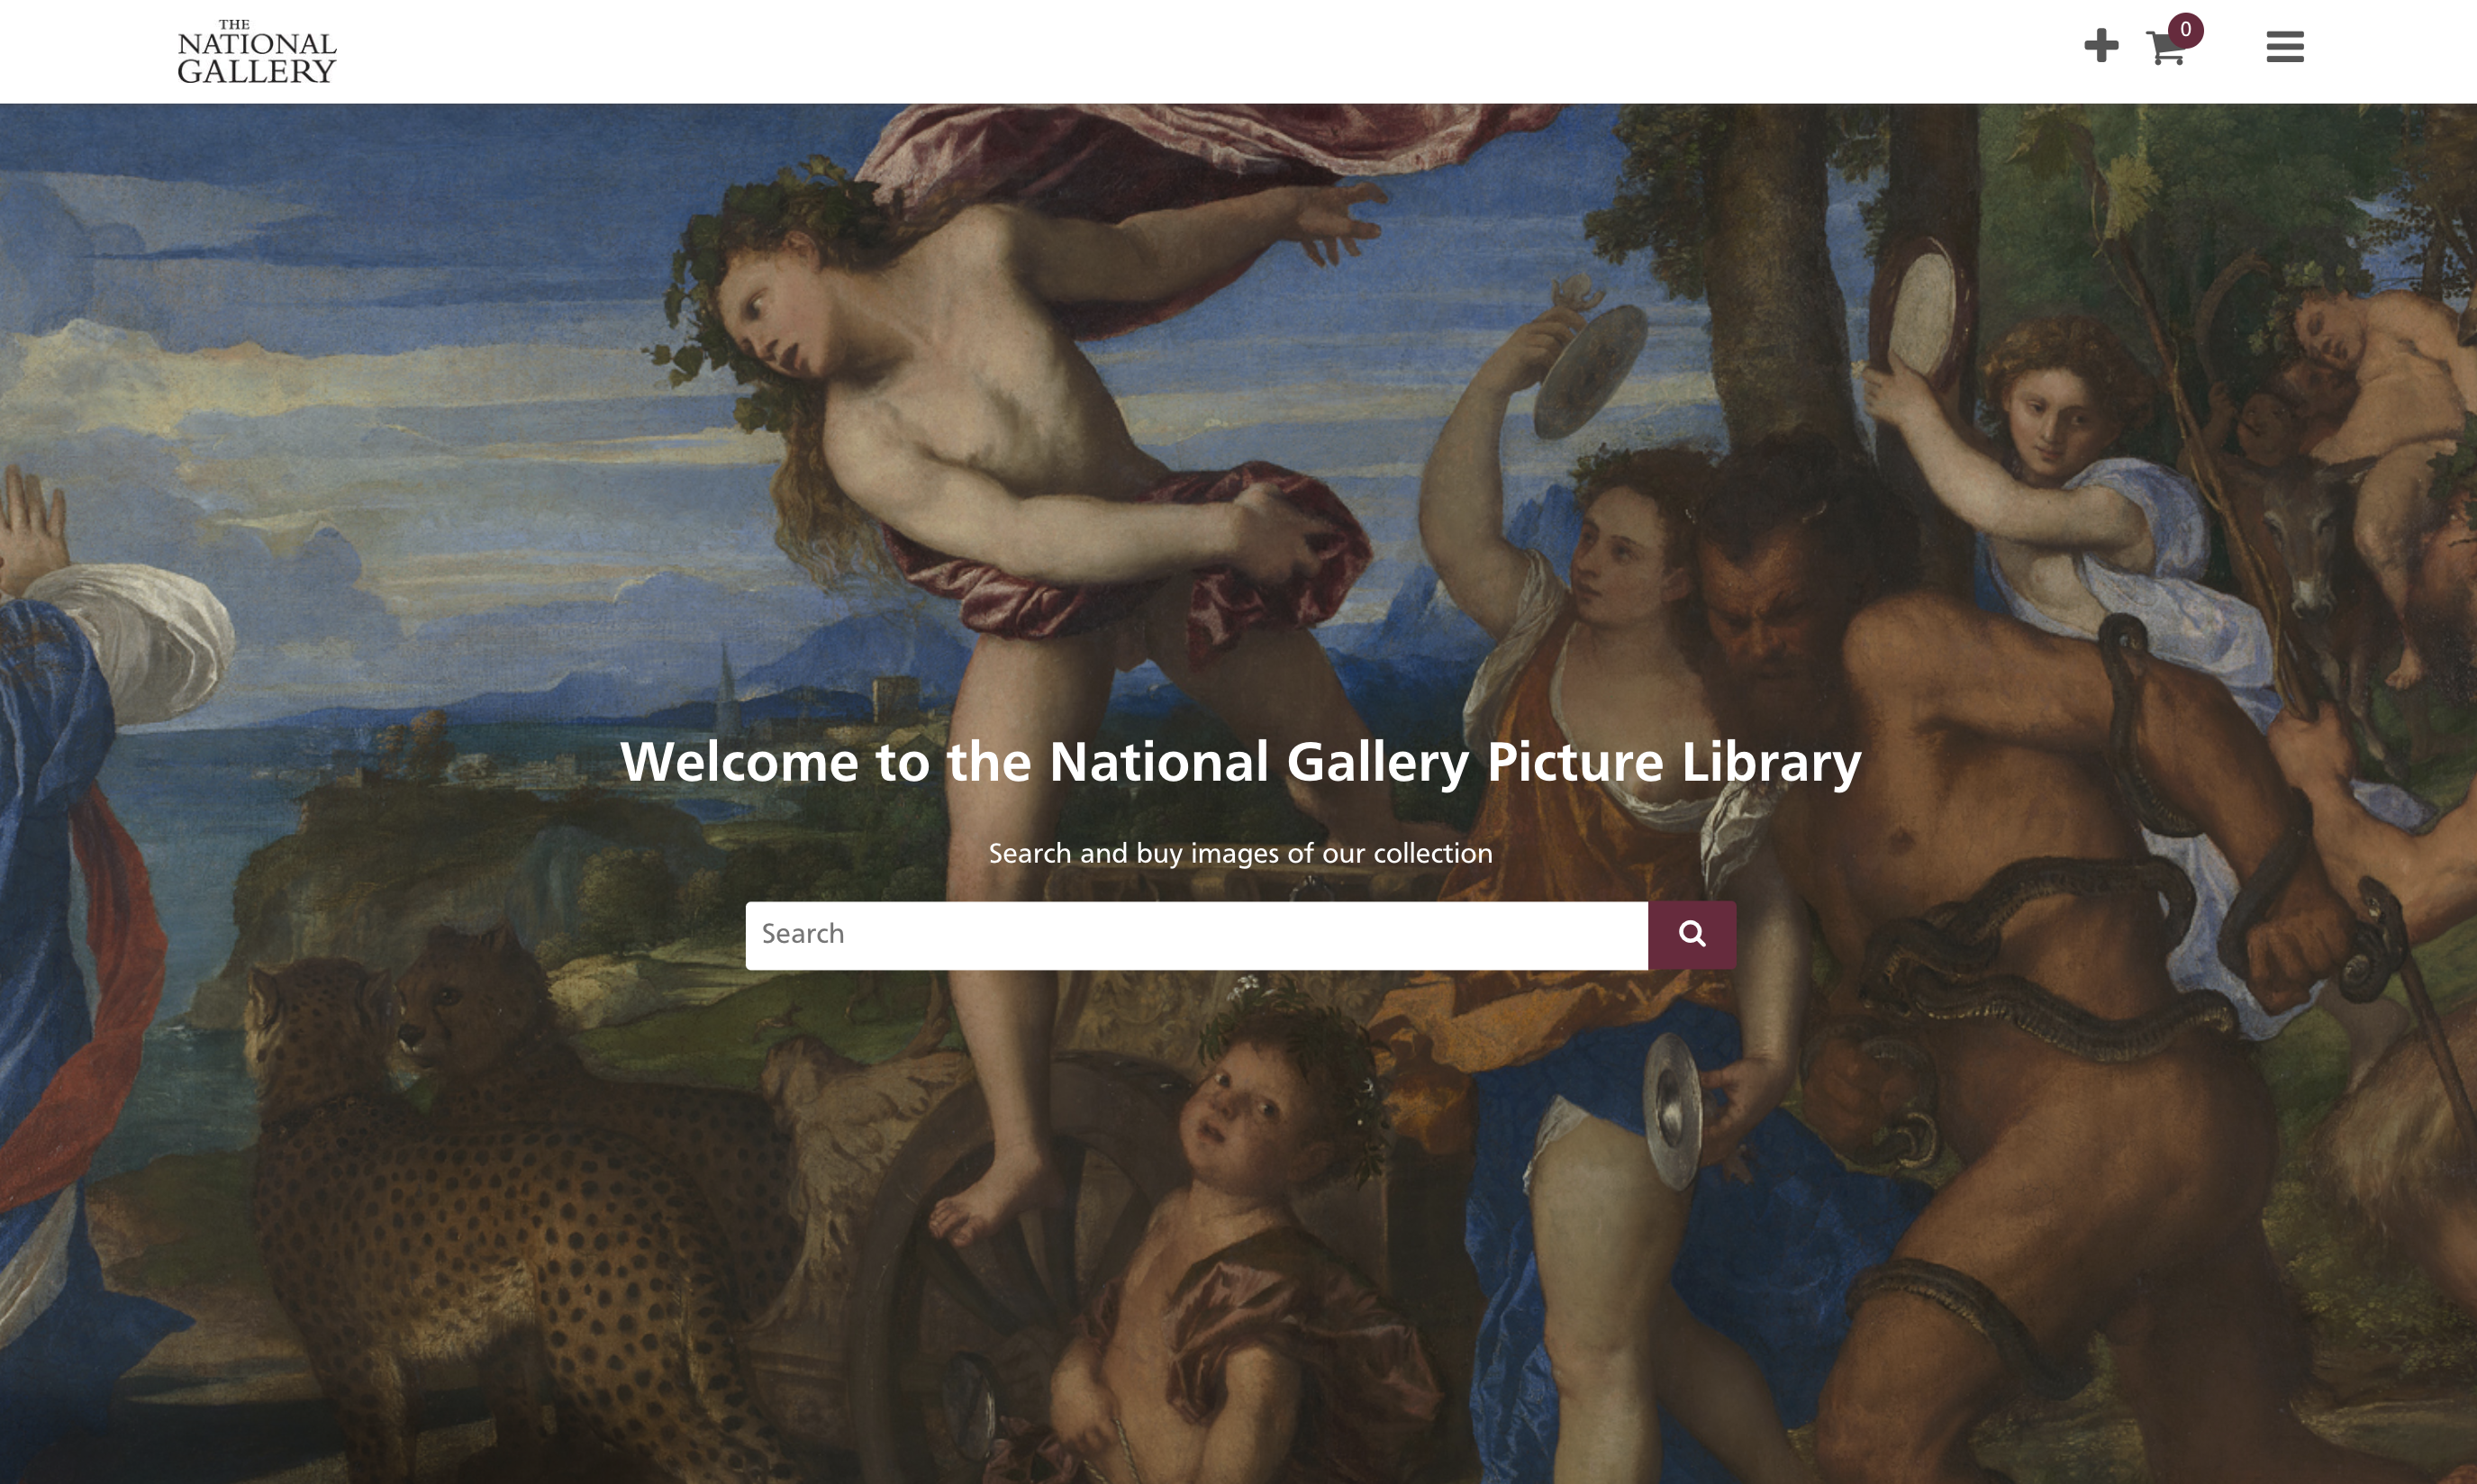 The National Gallery Picture library